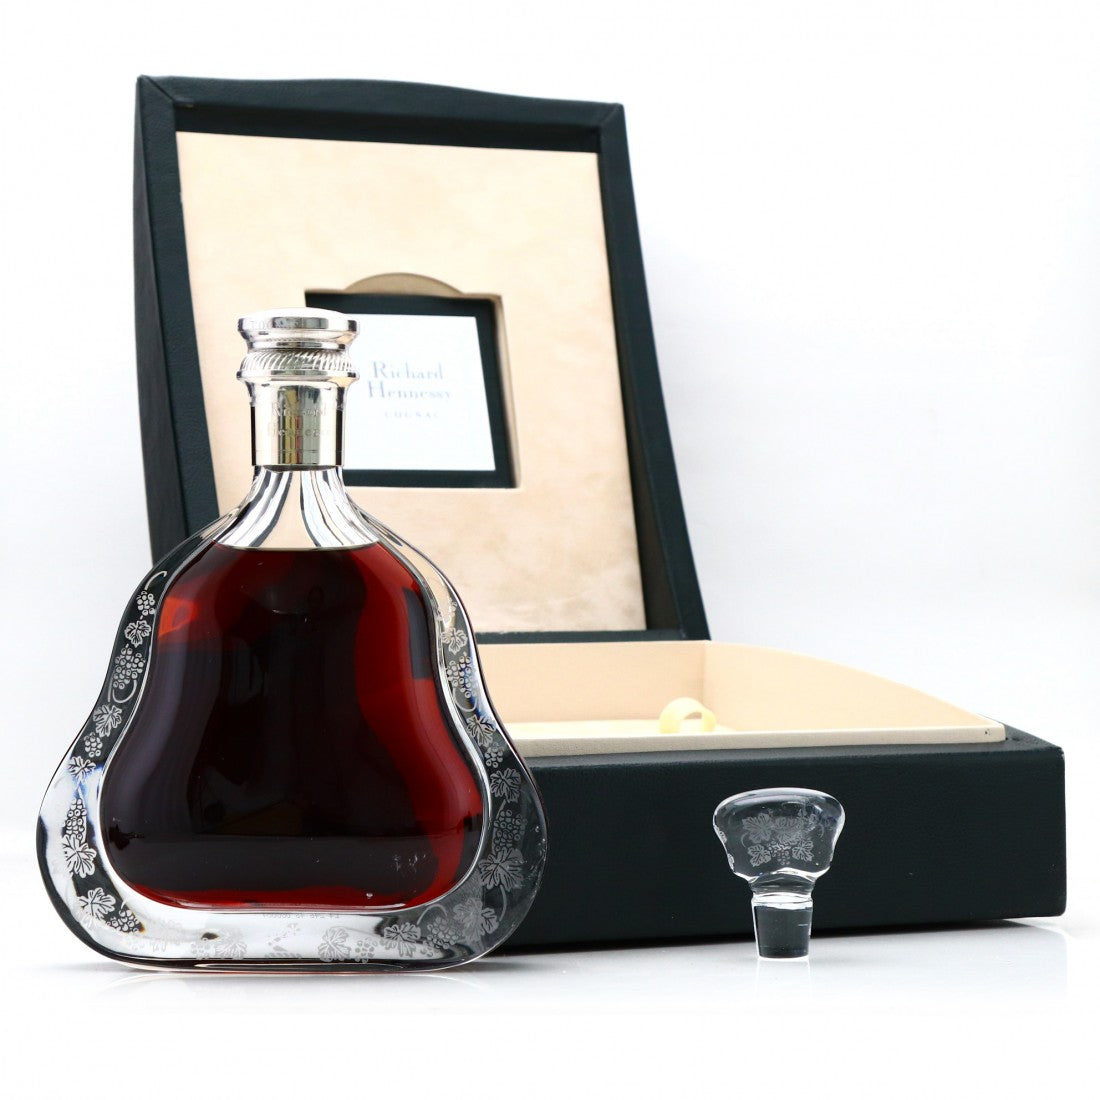 Richard Hennessy Cognac First Edition 1990s – Aging Barrel